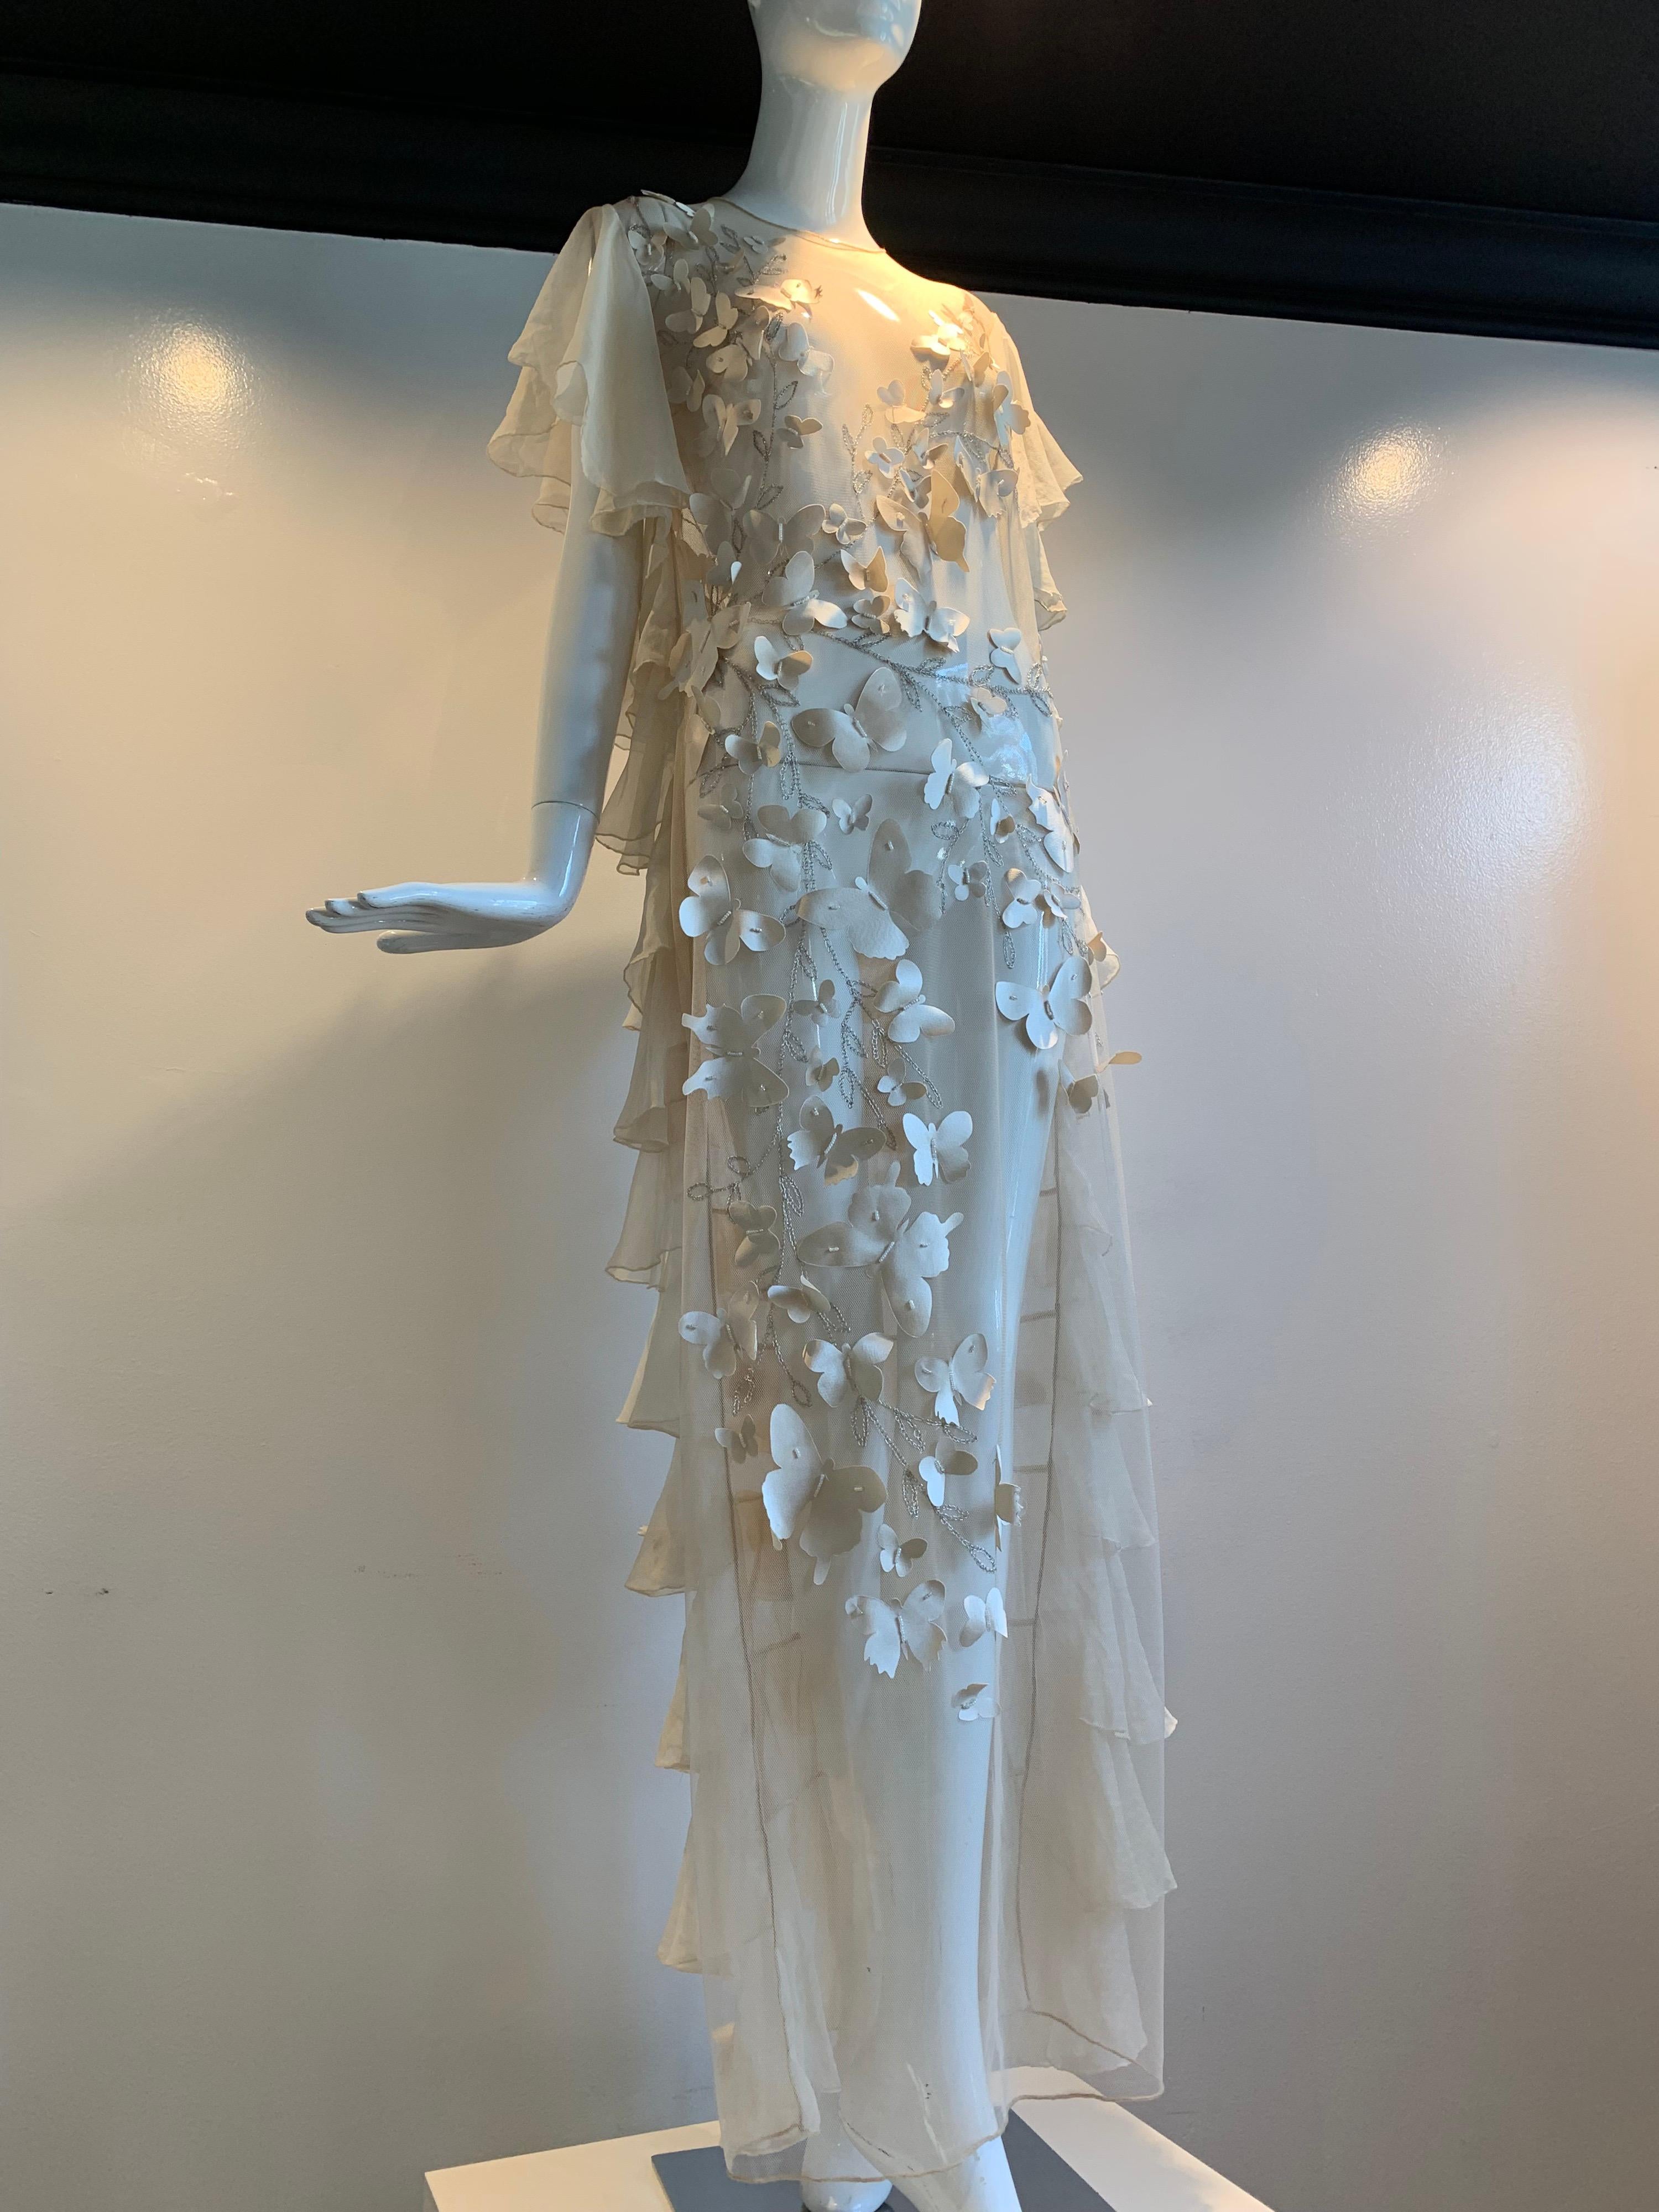 Torso Creations eggshell silk chiffon and tulle ruffled 1930s-inspired fantasy wedding gown with silk butterfly appliqués fashioned from a 1940s satin wedding dress. Front is a flat tulle panel, embroidered with silver branches and adorned with